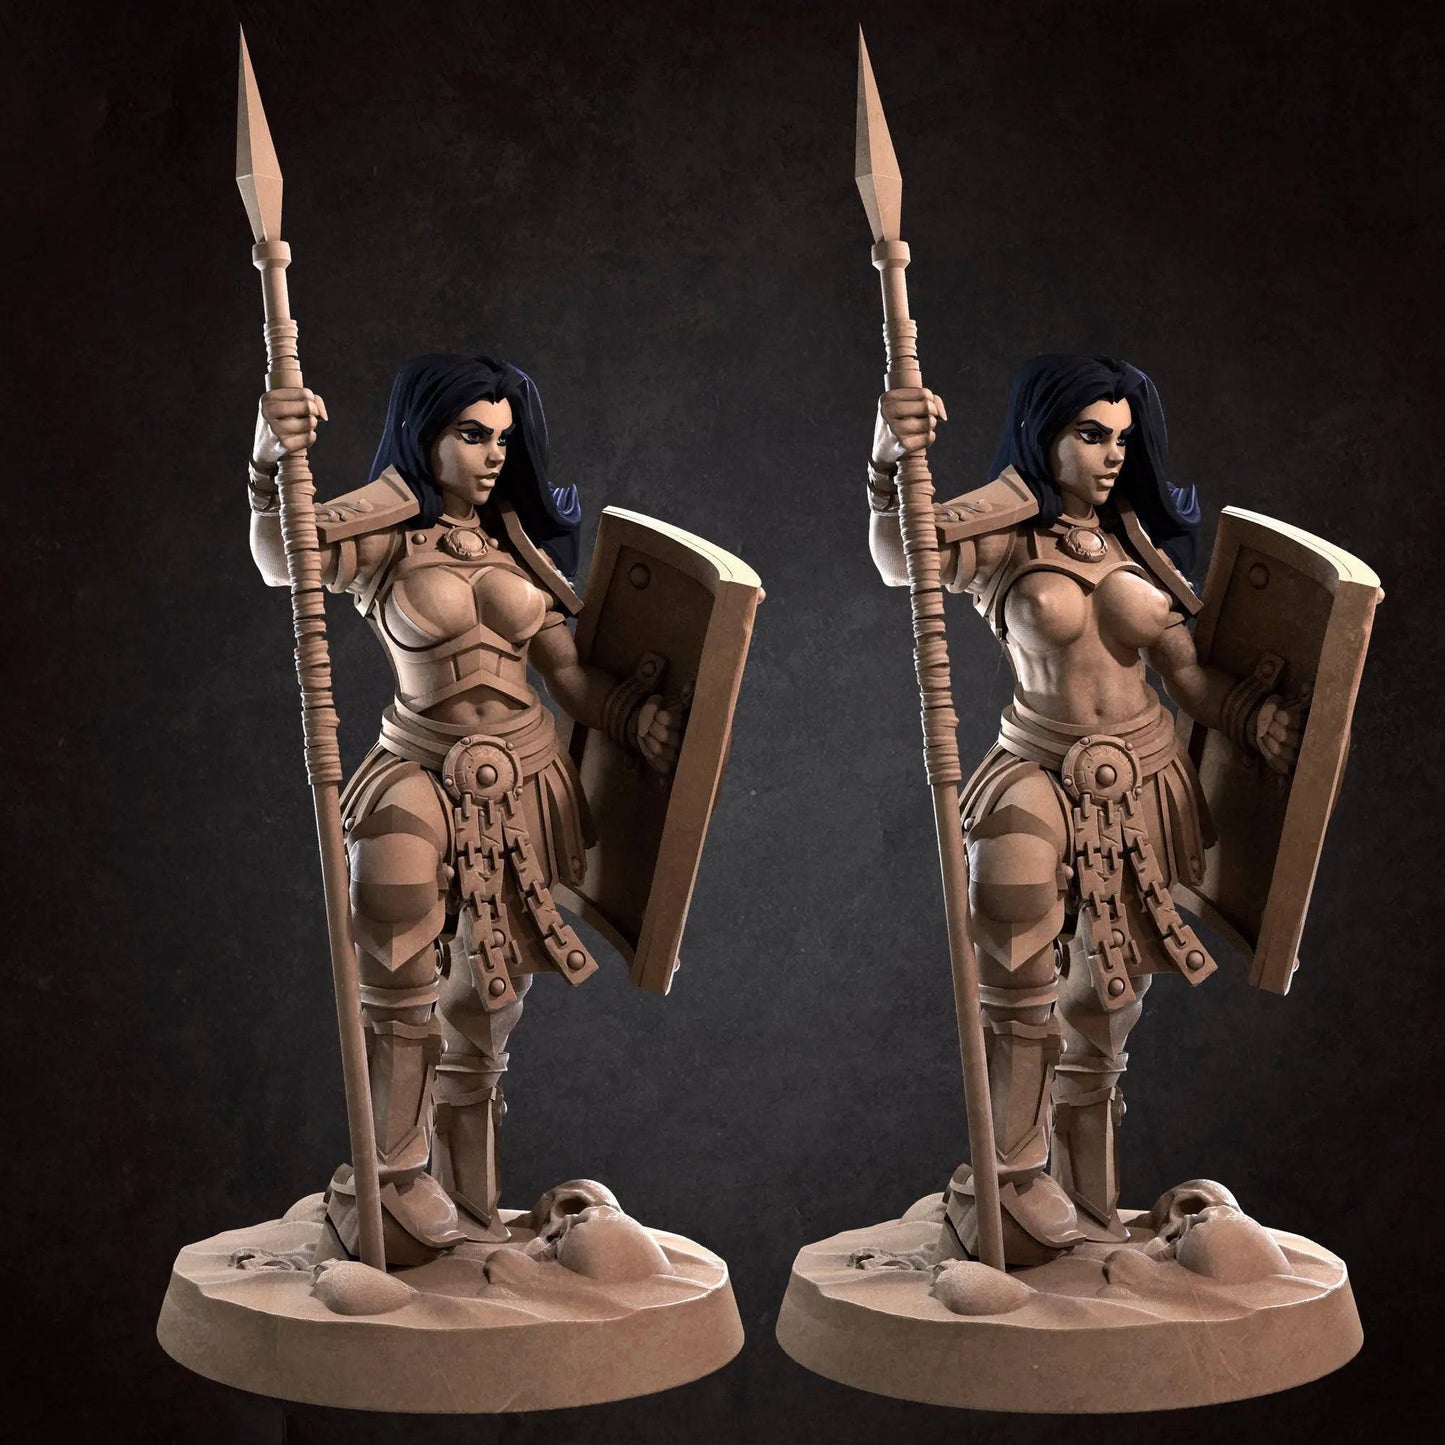 Kalista, Pinup SFW NSFW Lovely Woman, Gladiator Greek Spartan Soldier | D&D Miniature Pinup | Bite the Bullet - Tattles Told 3D